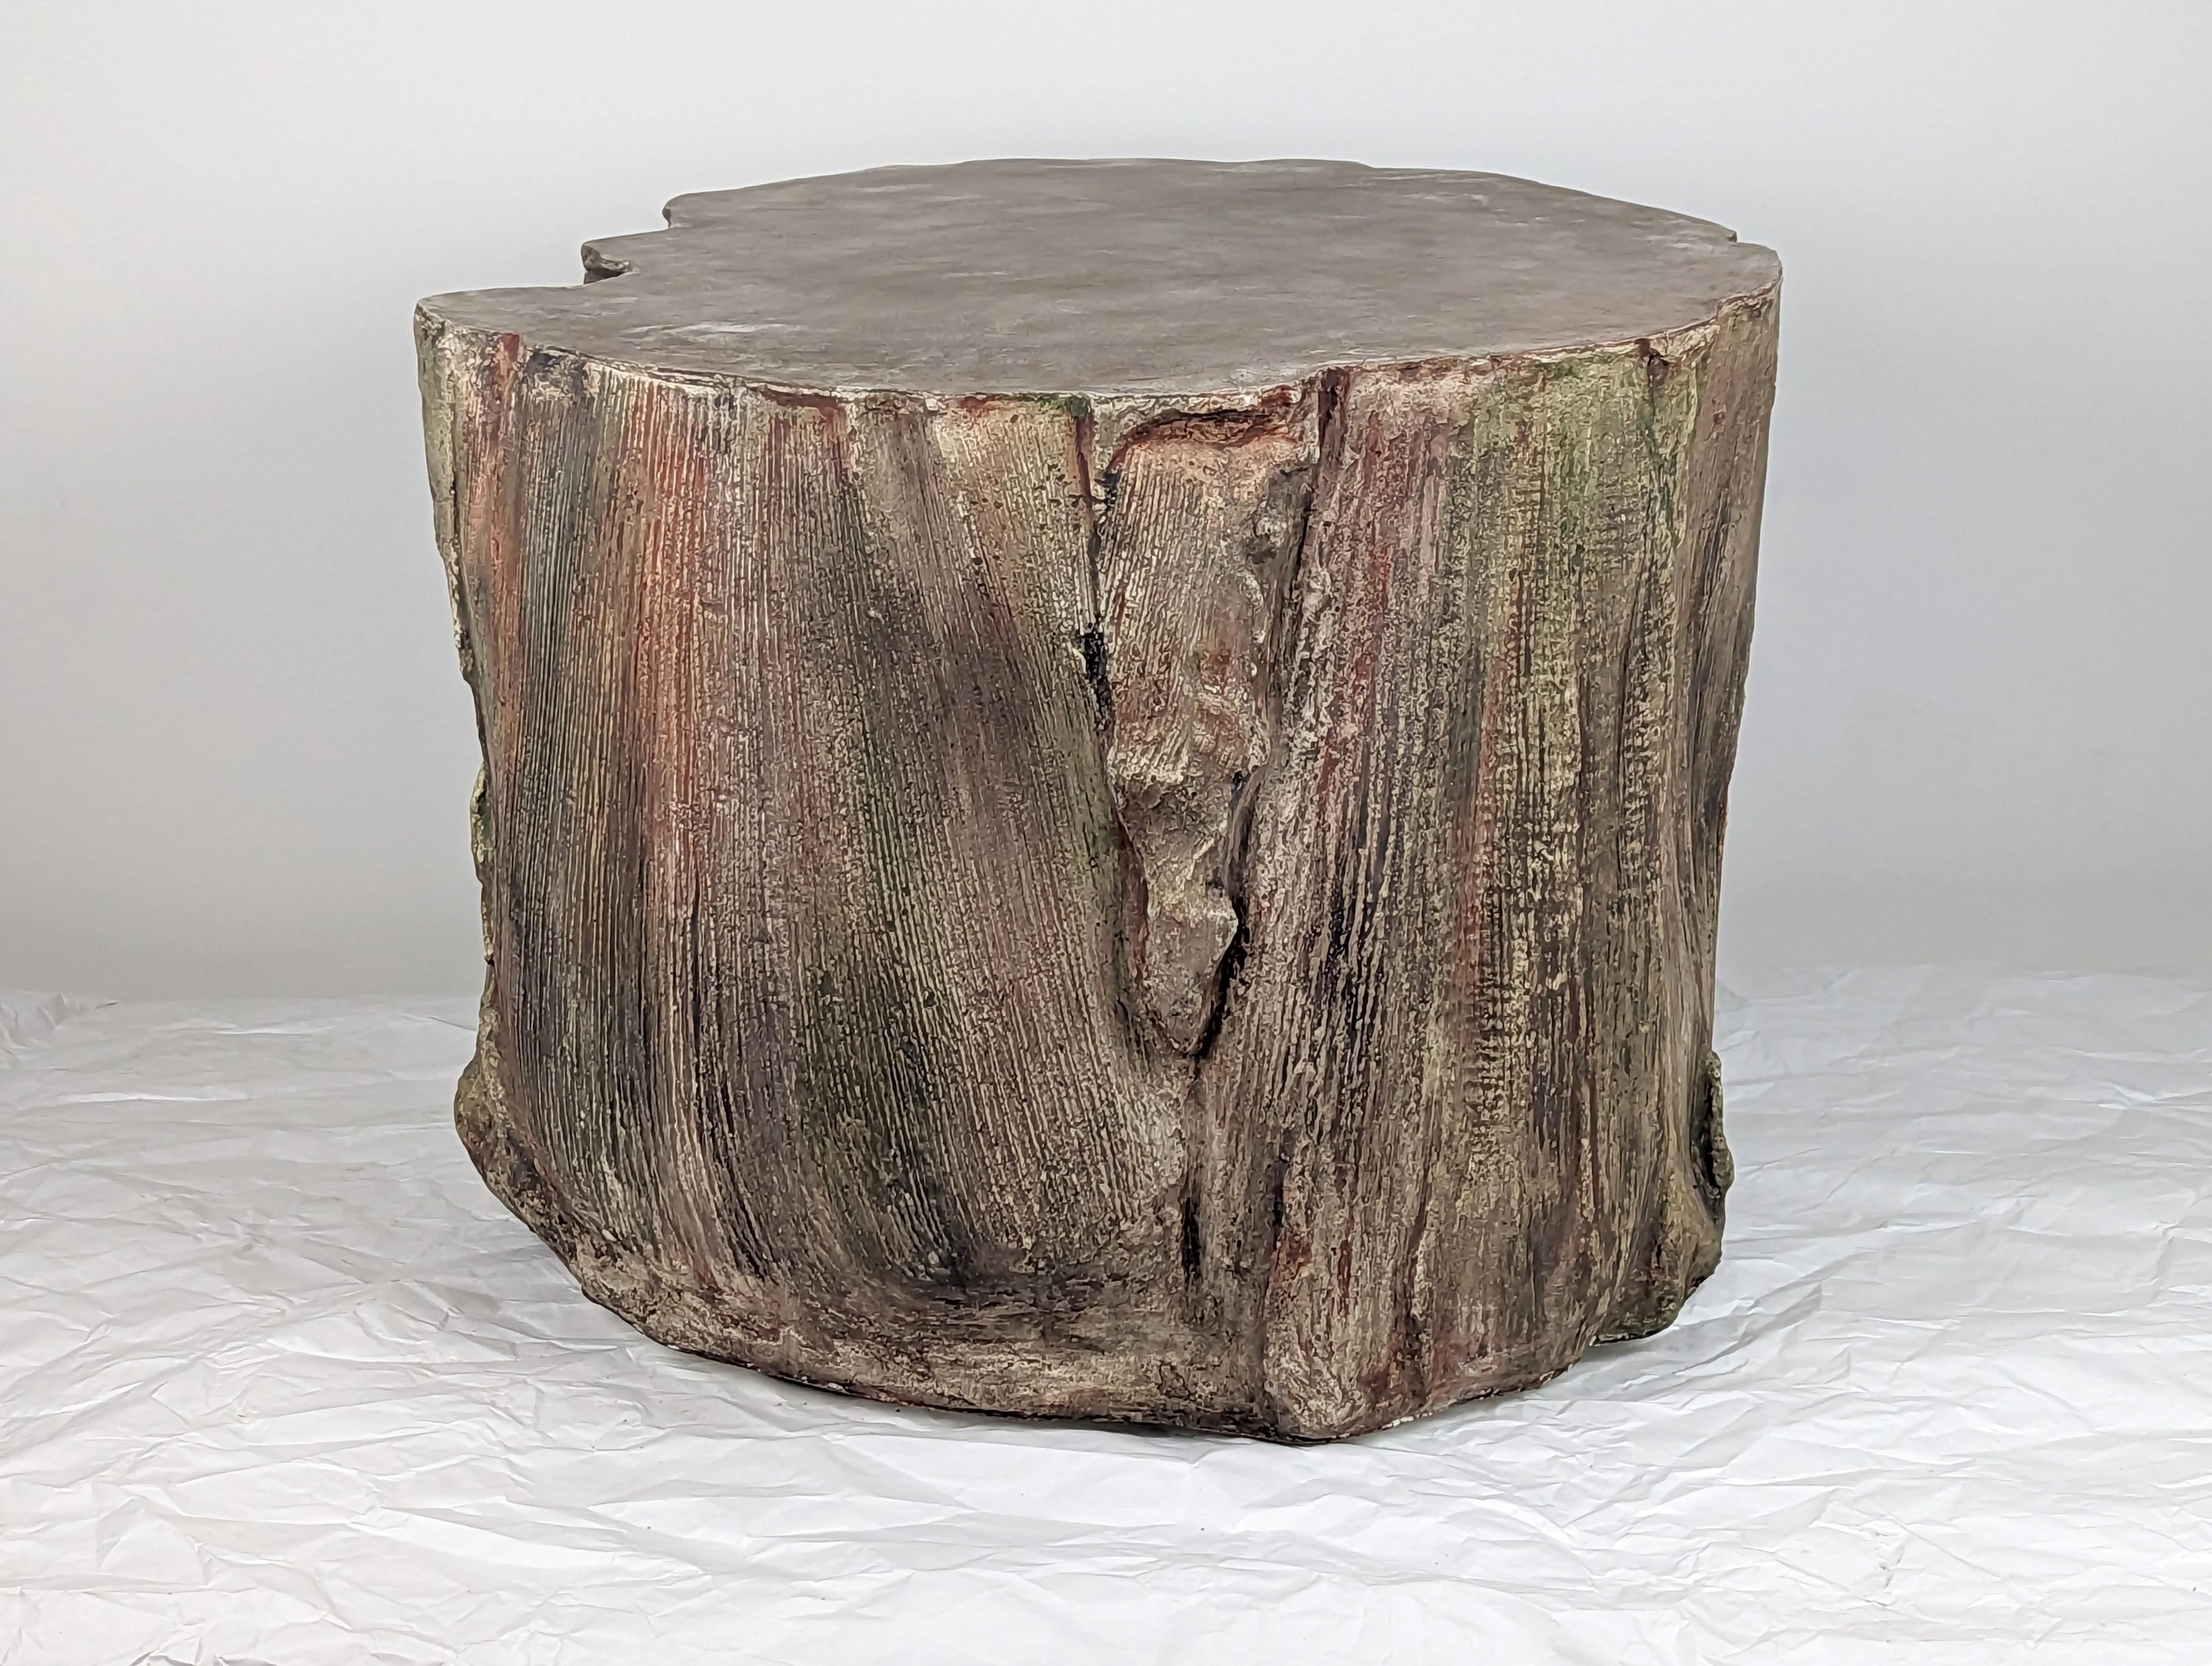 Bring the feeling of a mountain into your home with a one of a kind, organic and sculptural concrete coffee table molded from palm frond seedpods, reminiscing of a stump or wood grain. This biophilic work is colored with various tones of browns,